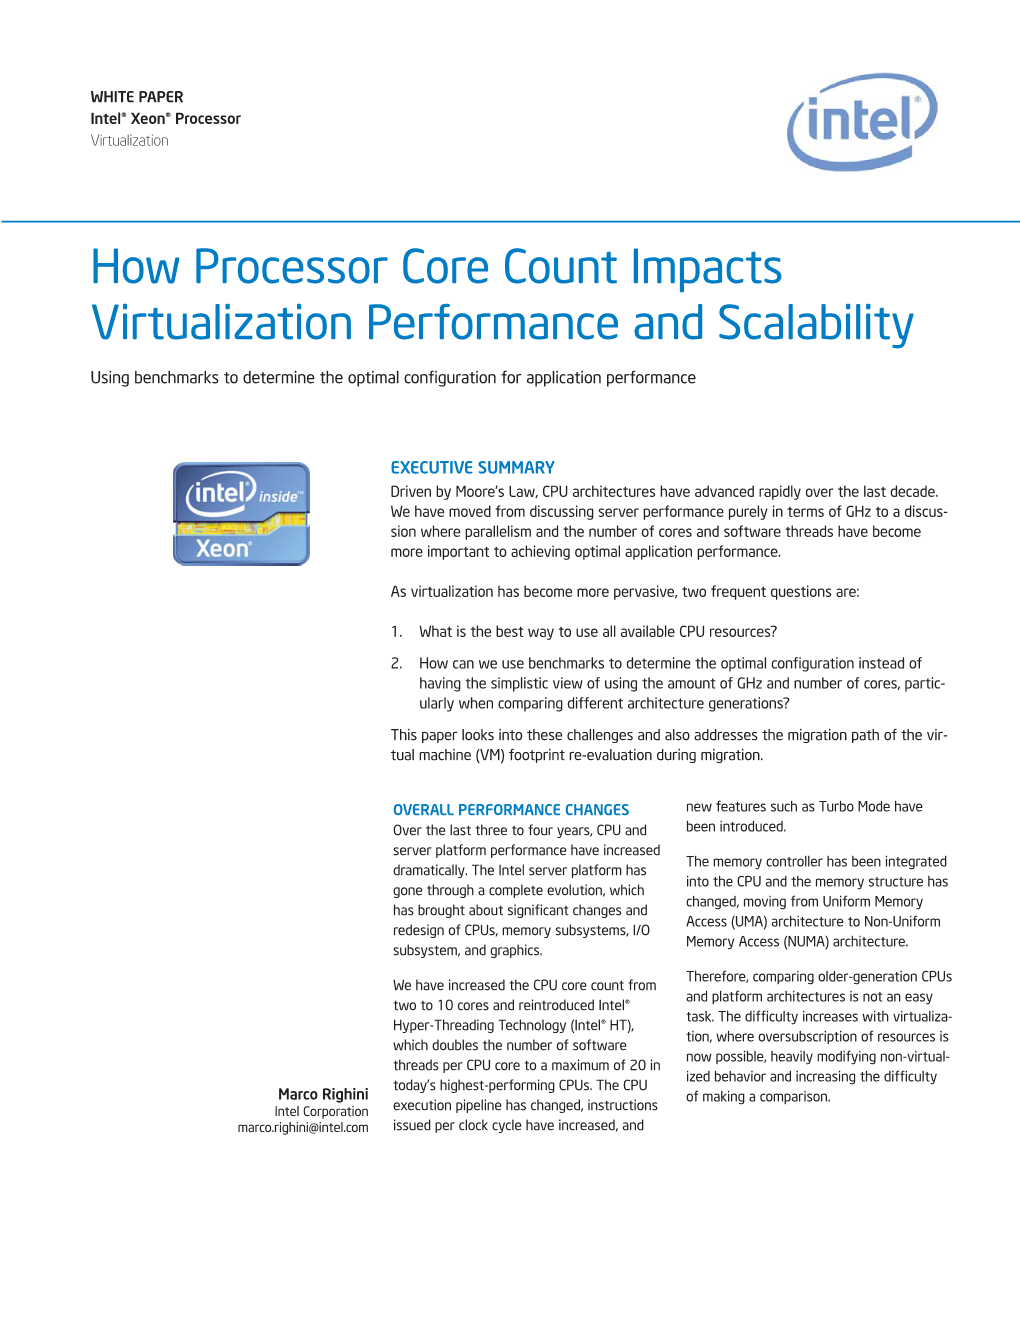 How Processor Core Count Impacts Virtualization Performance and Scalability